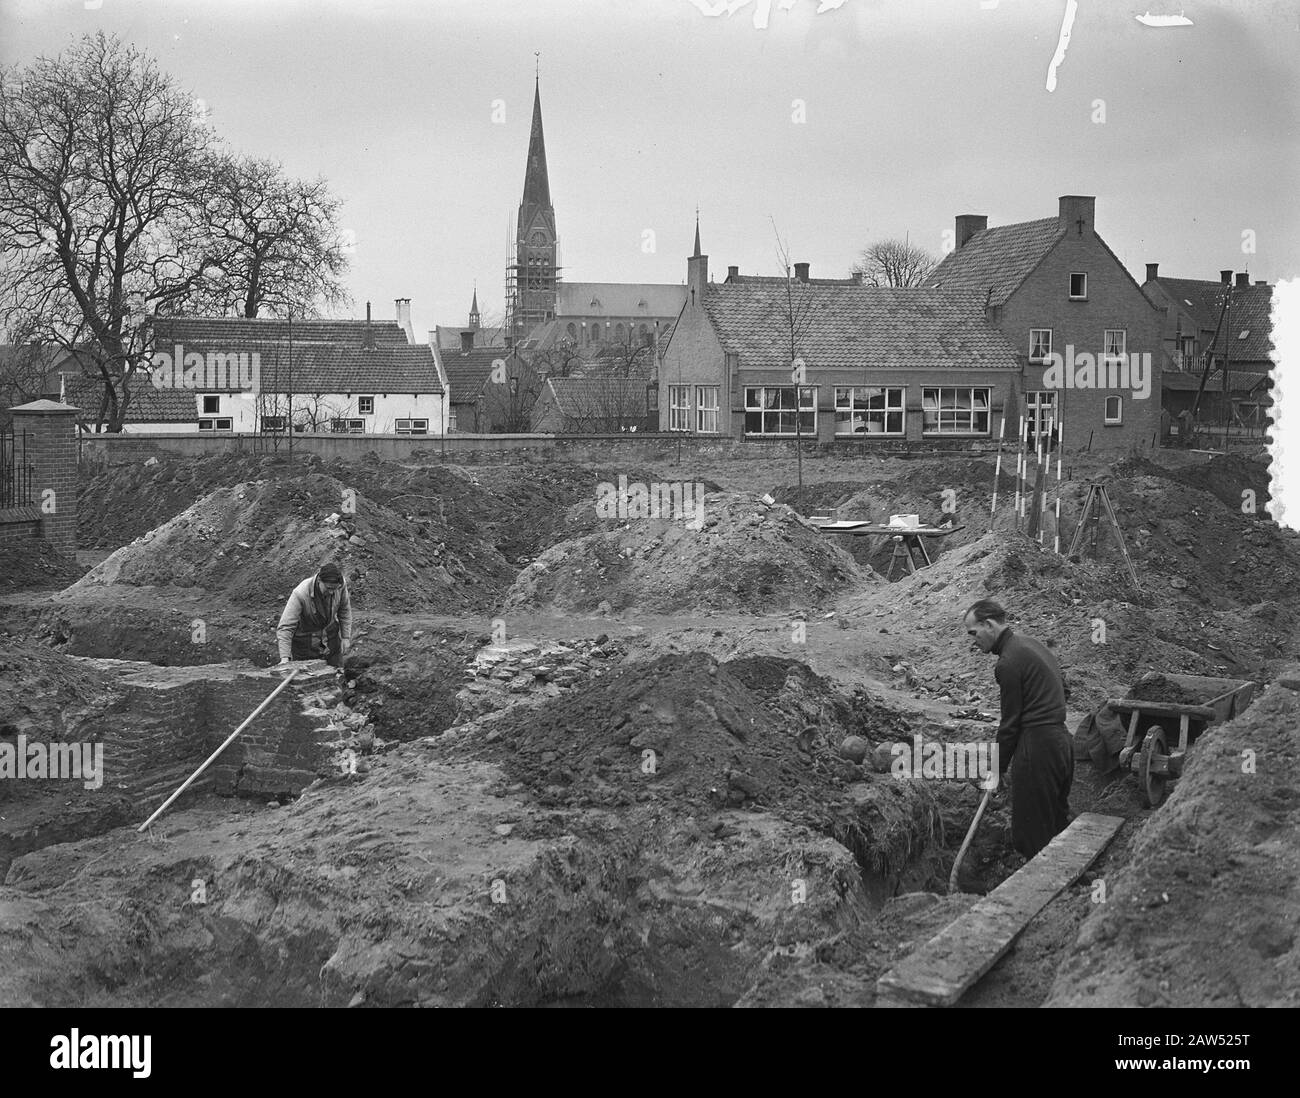 Excavations at Lith. Skulls Date: March 12, 1953 Location: Lithuania Keywords: DEAD HEADS, EXCAVATIONS Stock Photo